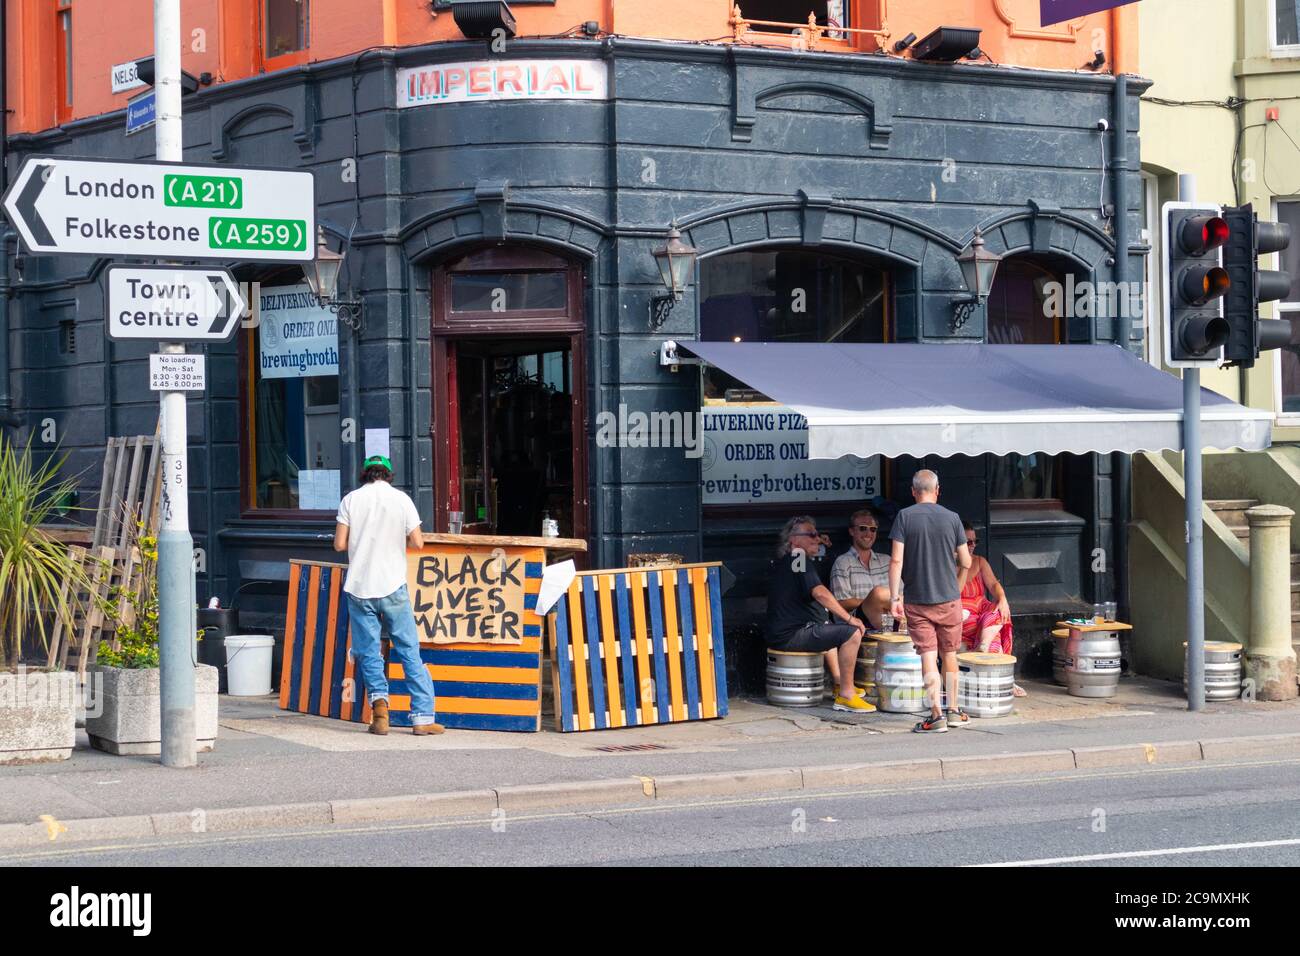 Pub serving customers outside with black lives matter sign on bar, hastings, east sussex, uk Stock Photo